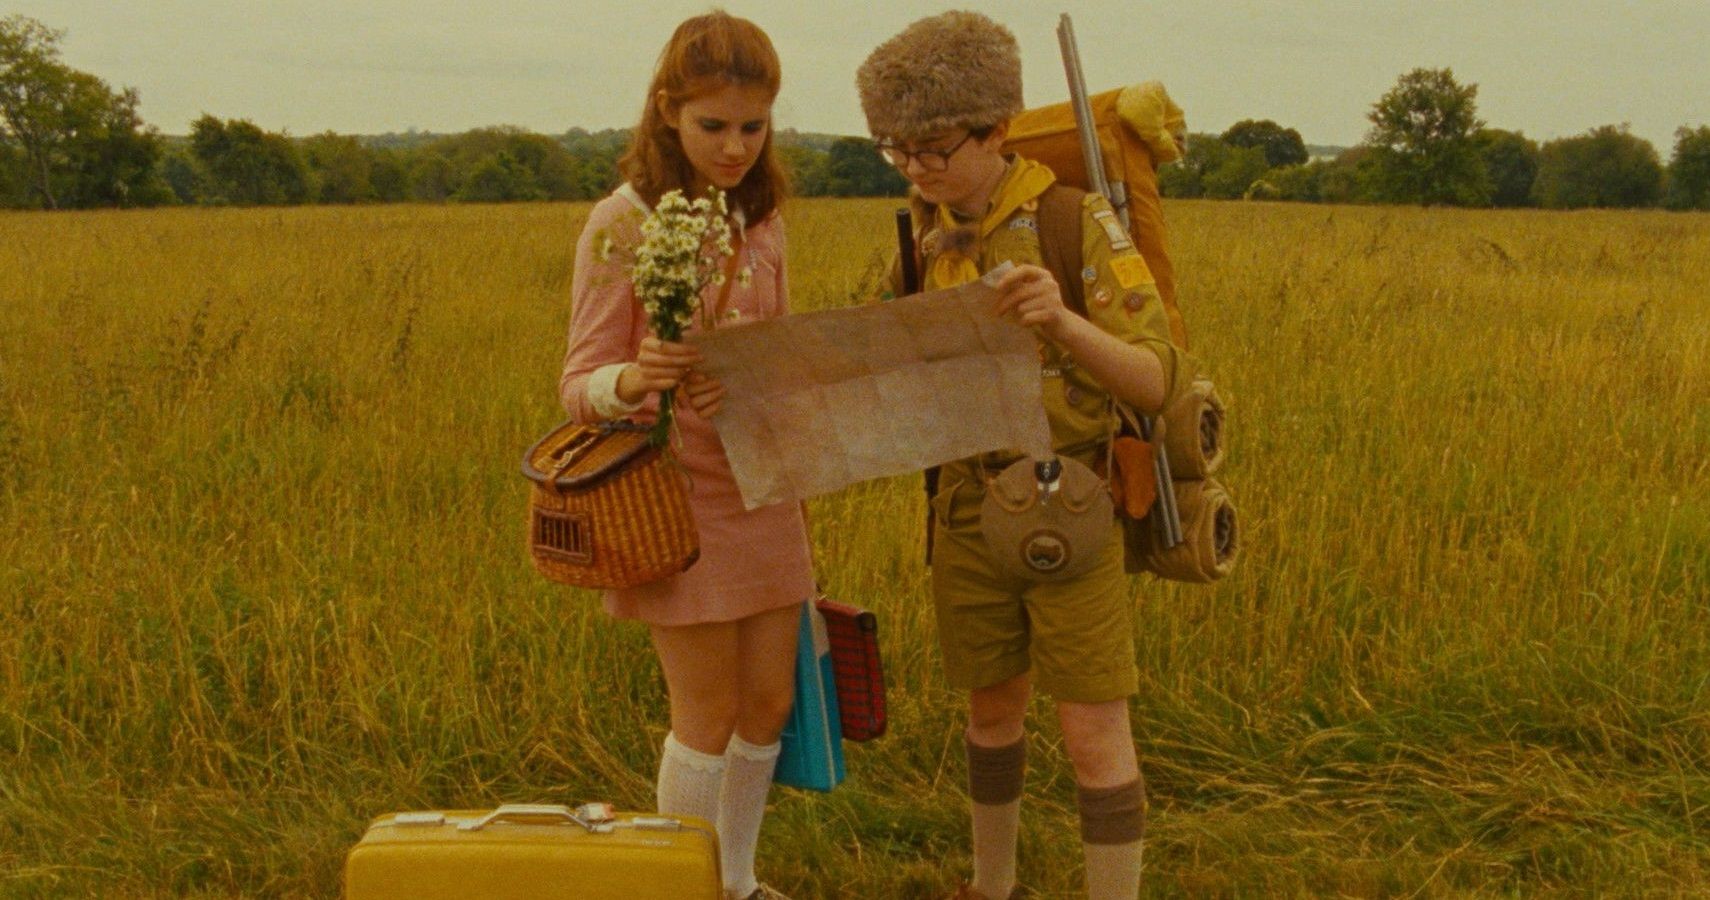 Sam Shukusky and Suzy Bishop of Wes Anderson's 2012 film Moonrise Kingdom, stand together in a field examining a map. 